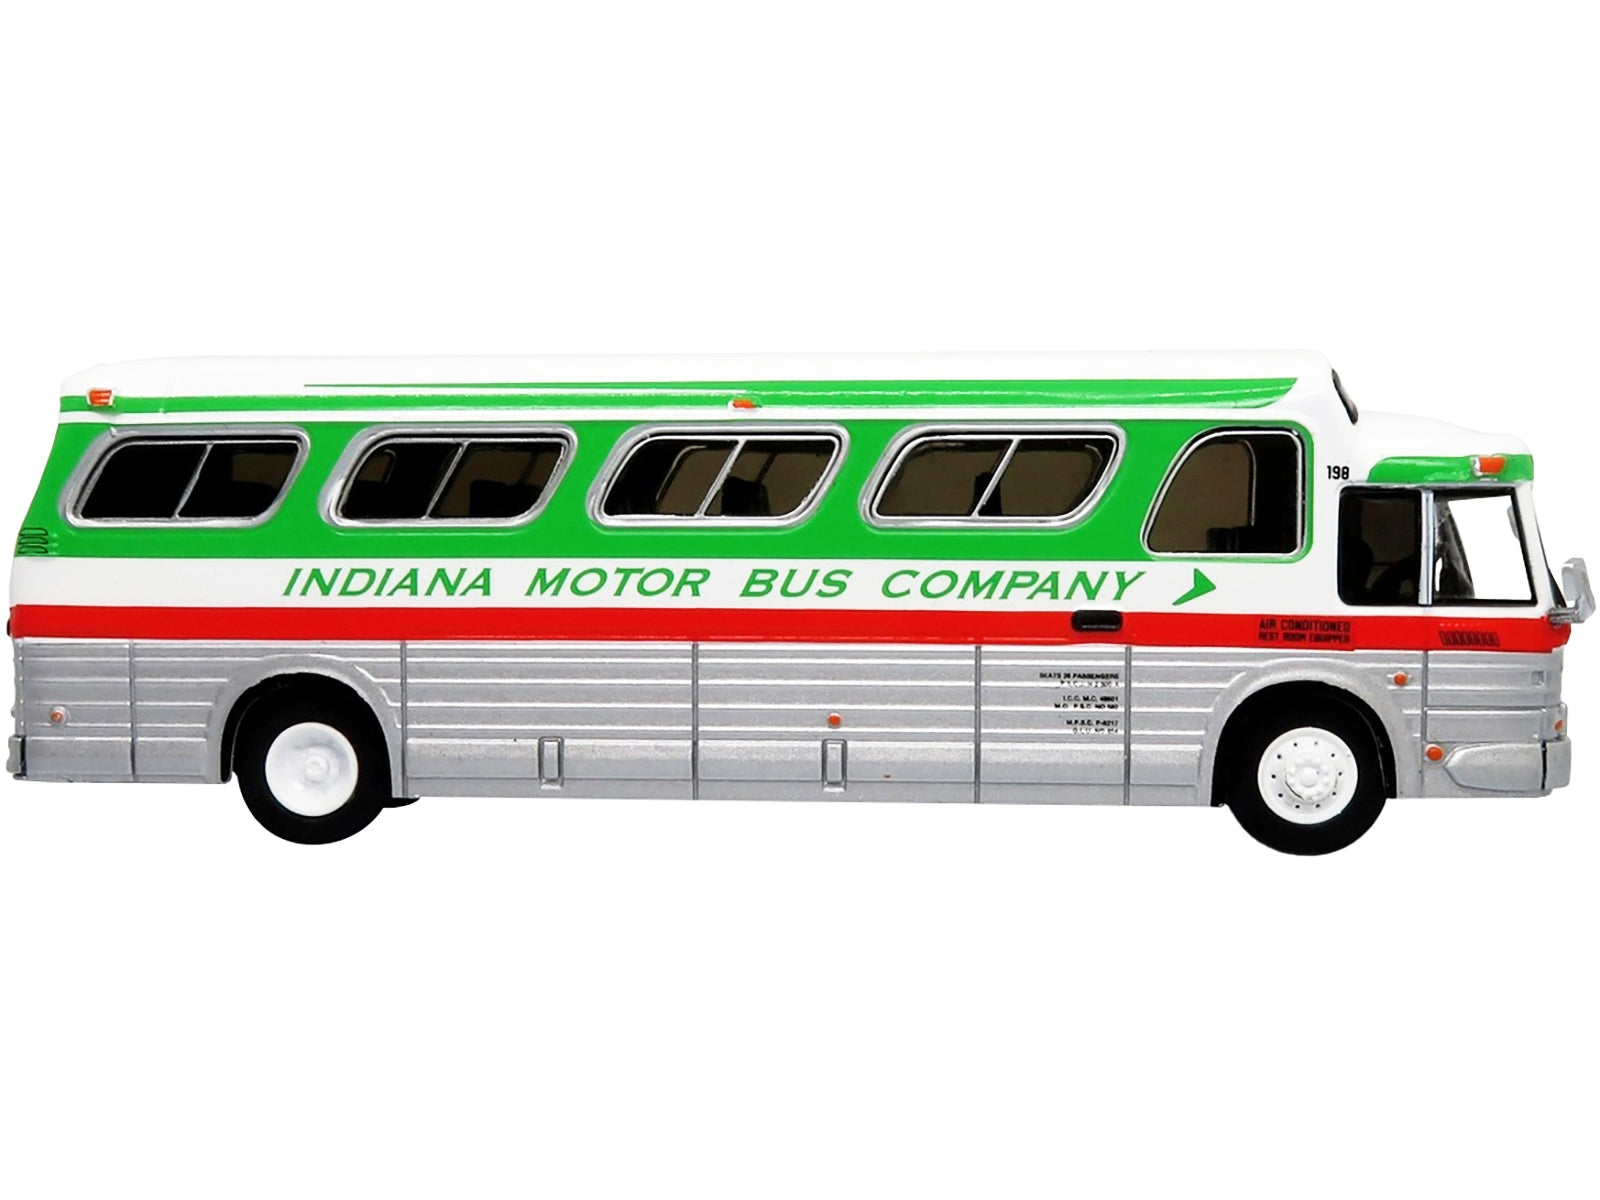 1966 GM PD4107 "Buffalo" Coach Bus "Indiana Motor Bus Company" Destination: Indianapolis "Vintage Bus & Motorcoach Collection" 1/87 Diecast Model by Iconic Replicas